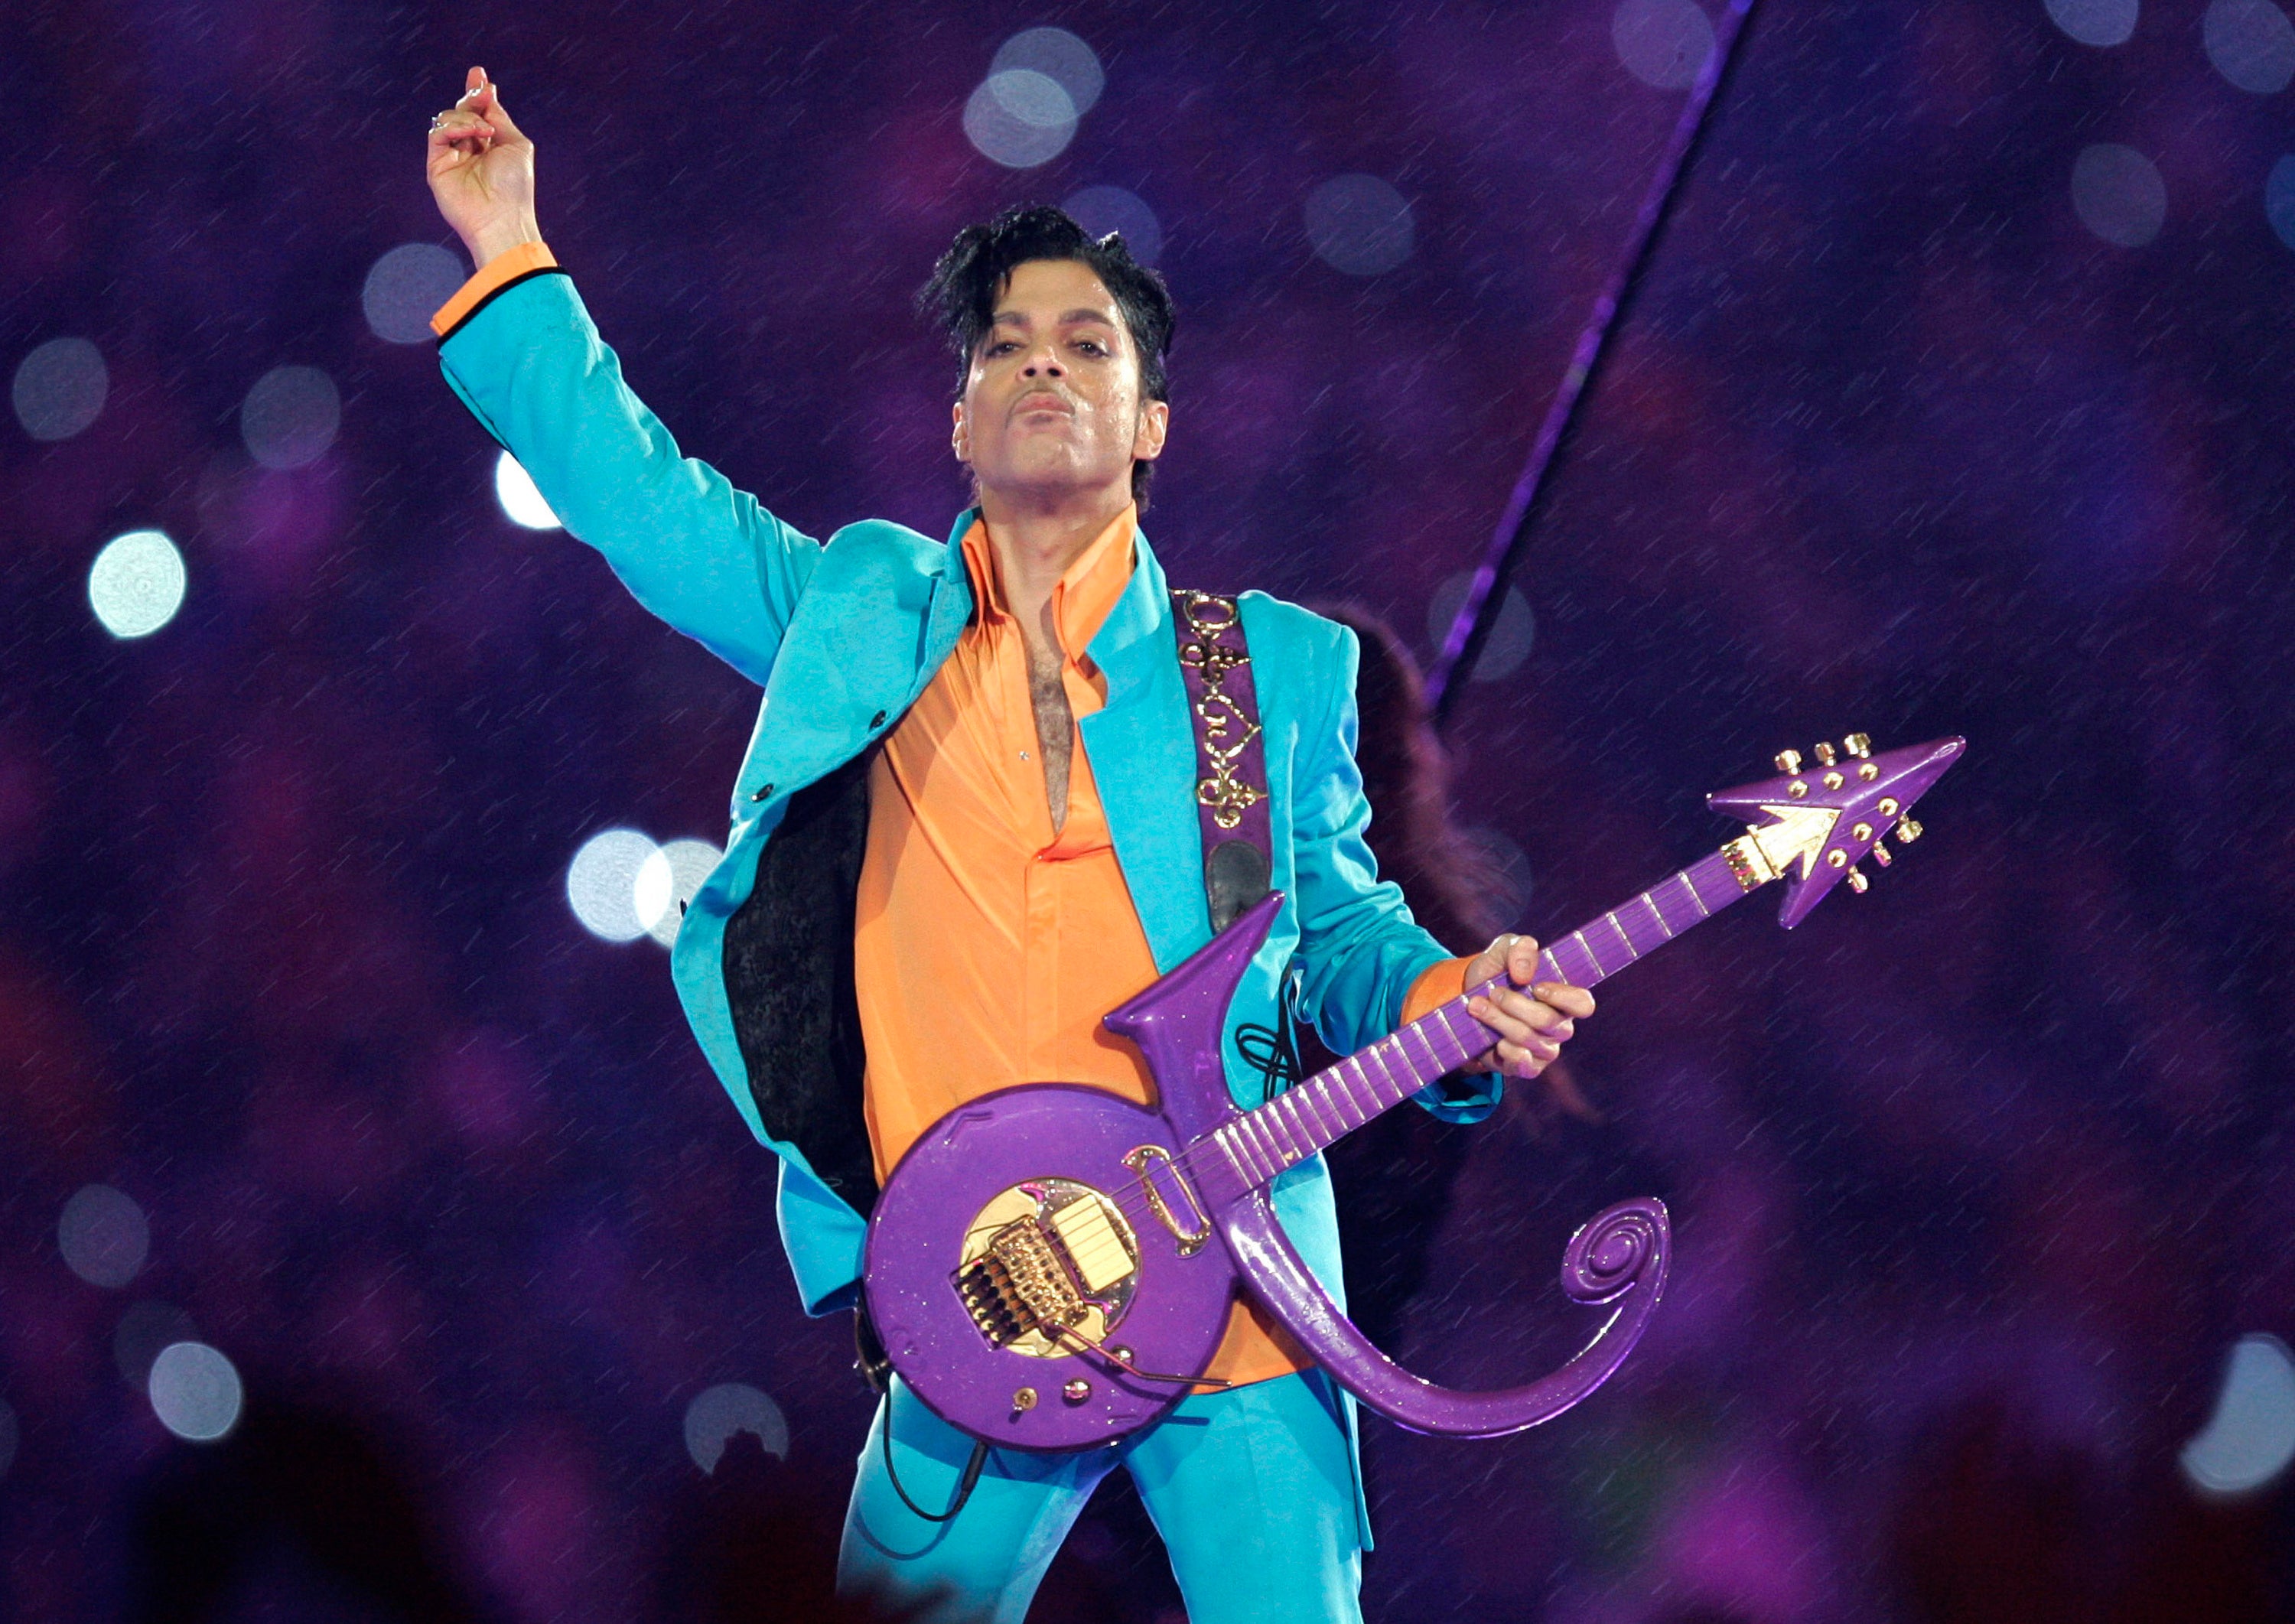 Prince performing during the Super Bowl in 2007